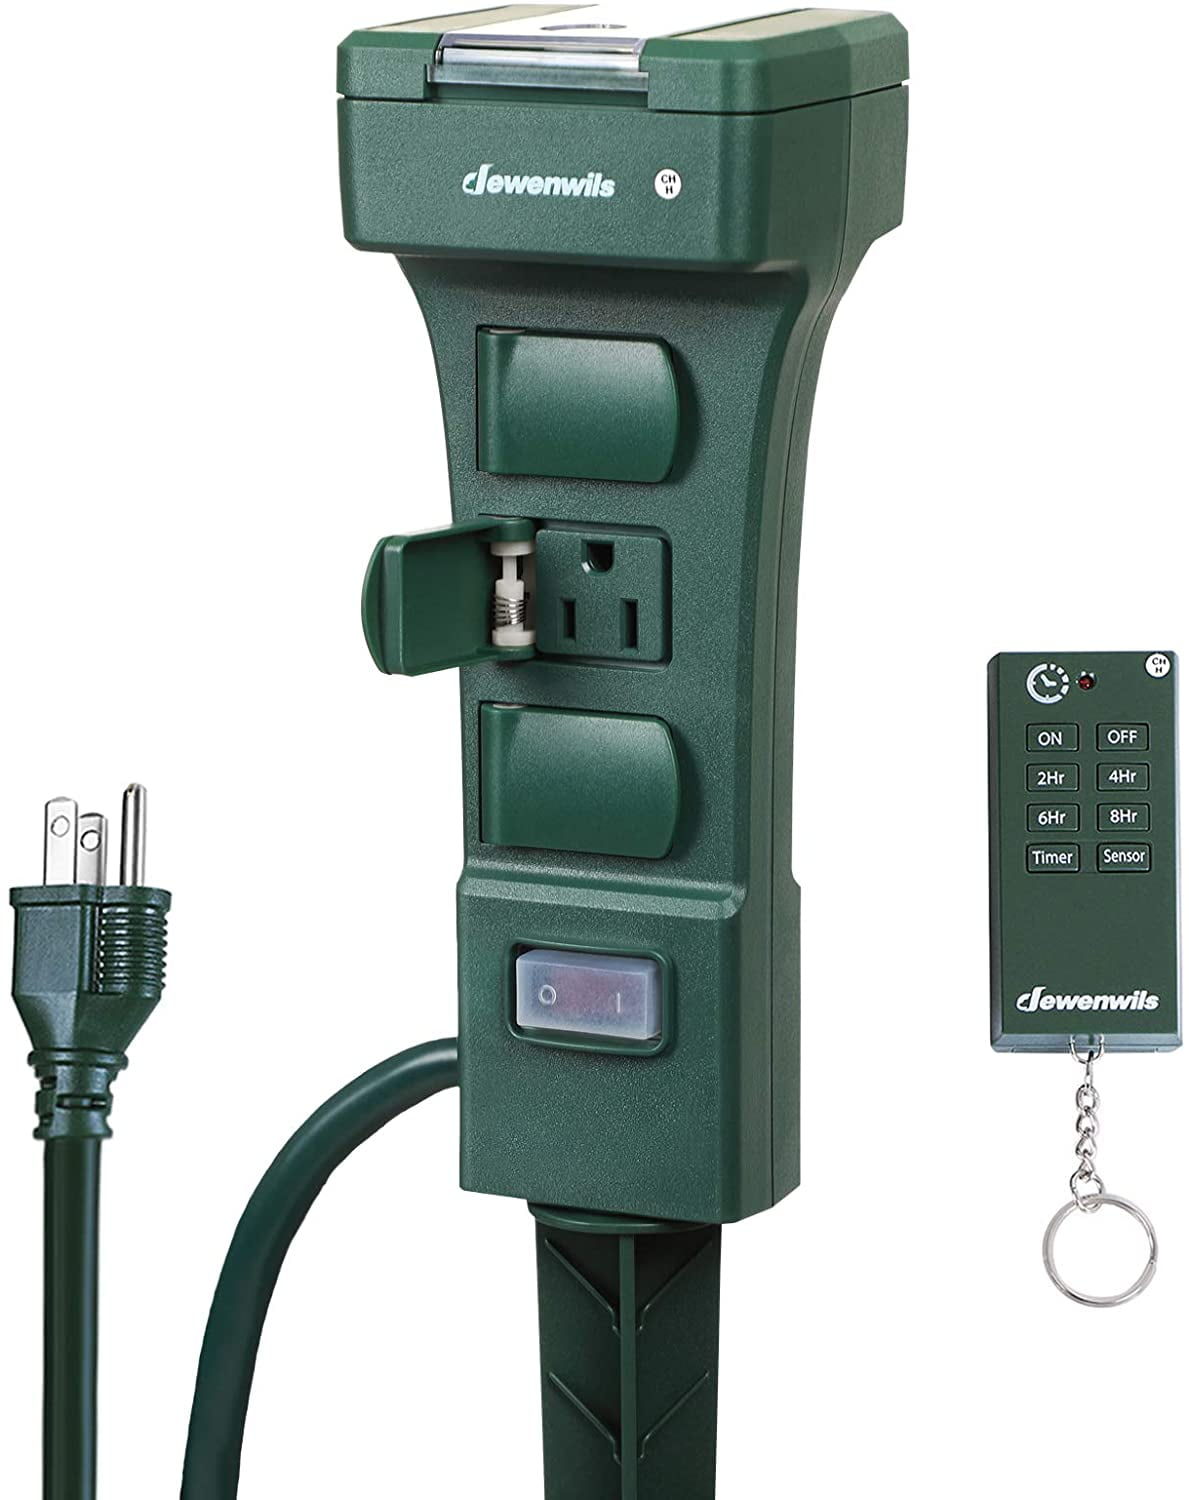 DEWENWILS Outdoor Power Stake Timer Waterproof, 100FT Wireless Remote  Control, 6 Grounded Outlets, 6FT Extension Cord, Photocell Dusk to Dawn for  Christmas Decoration, Lights, Garden, UL Listed 